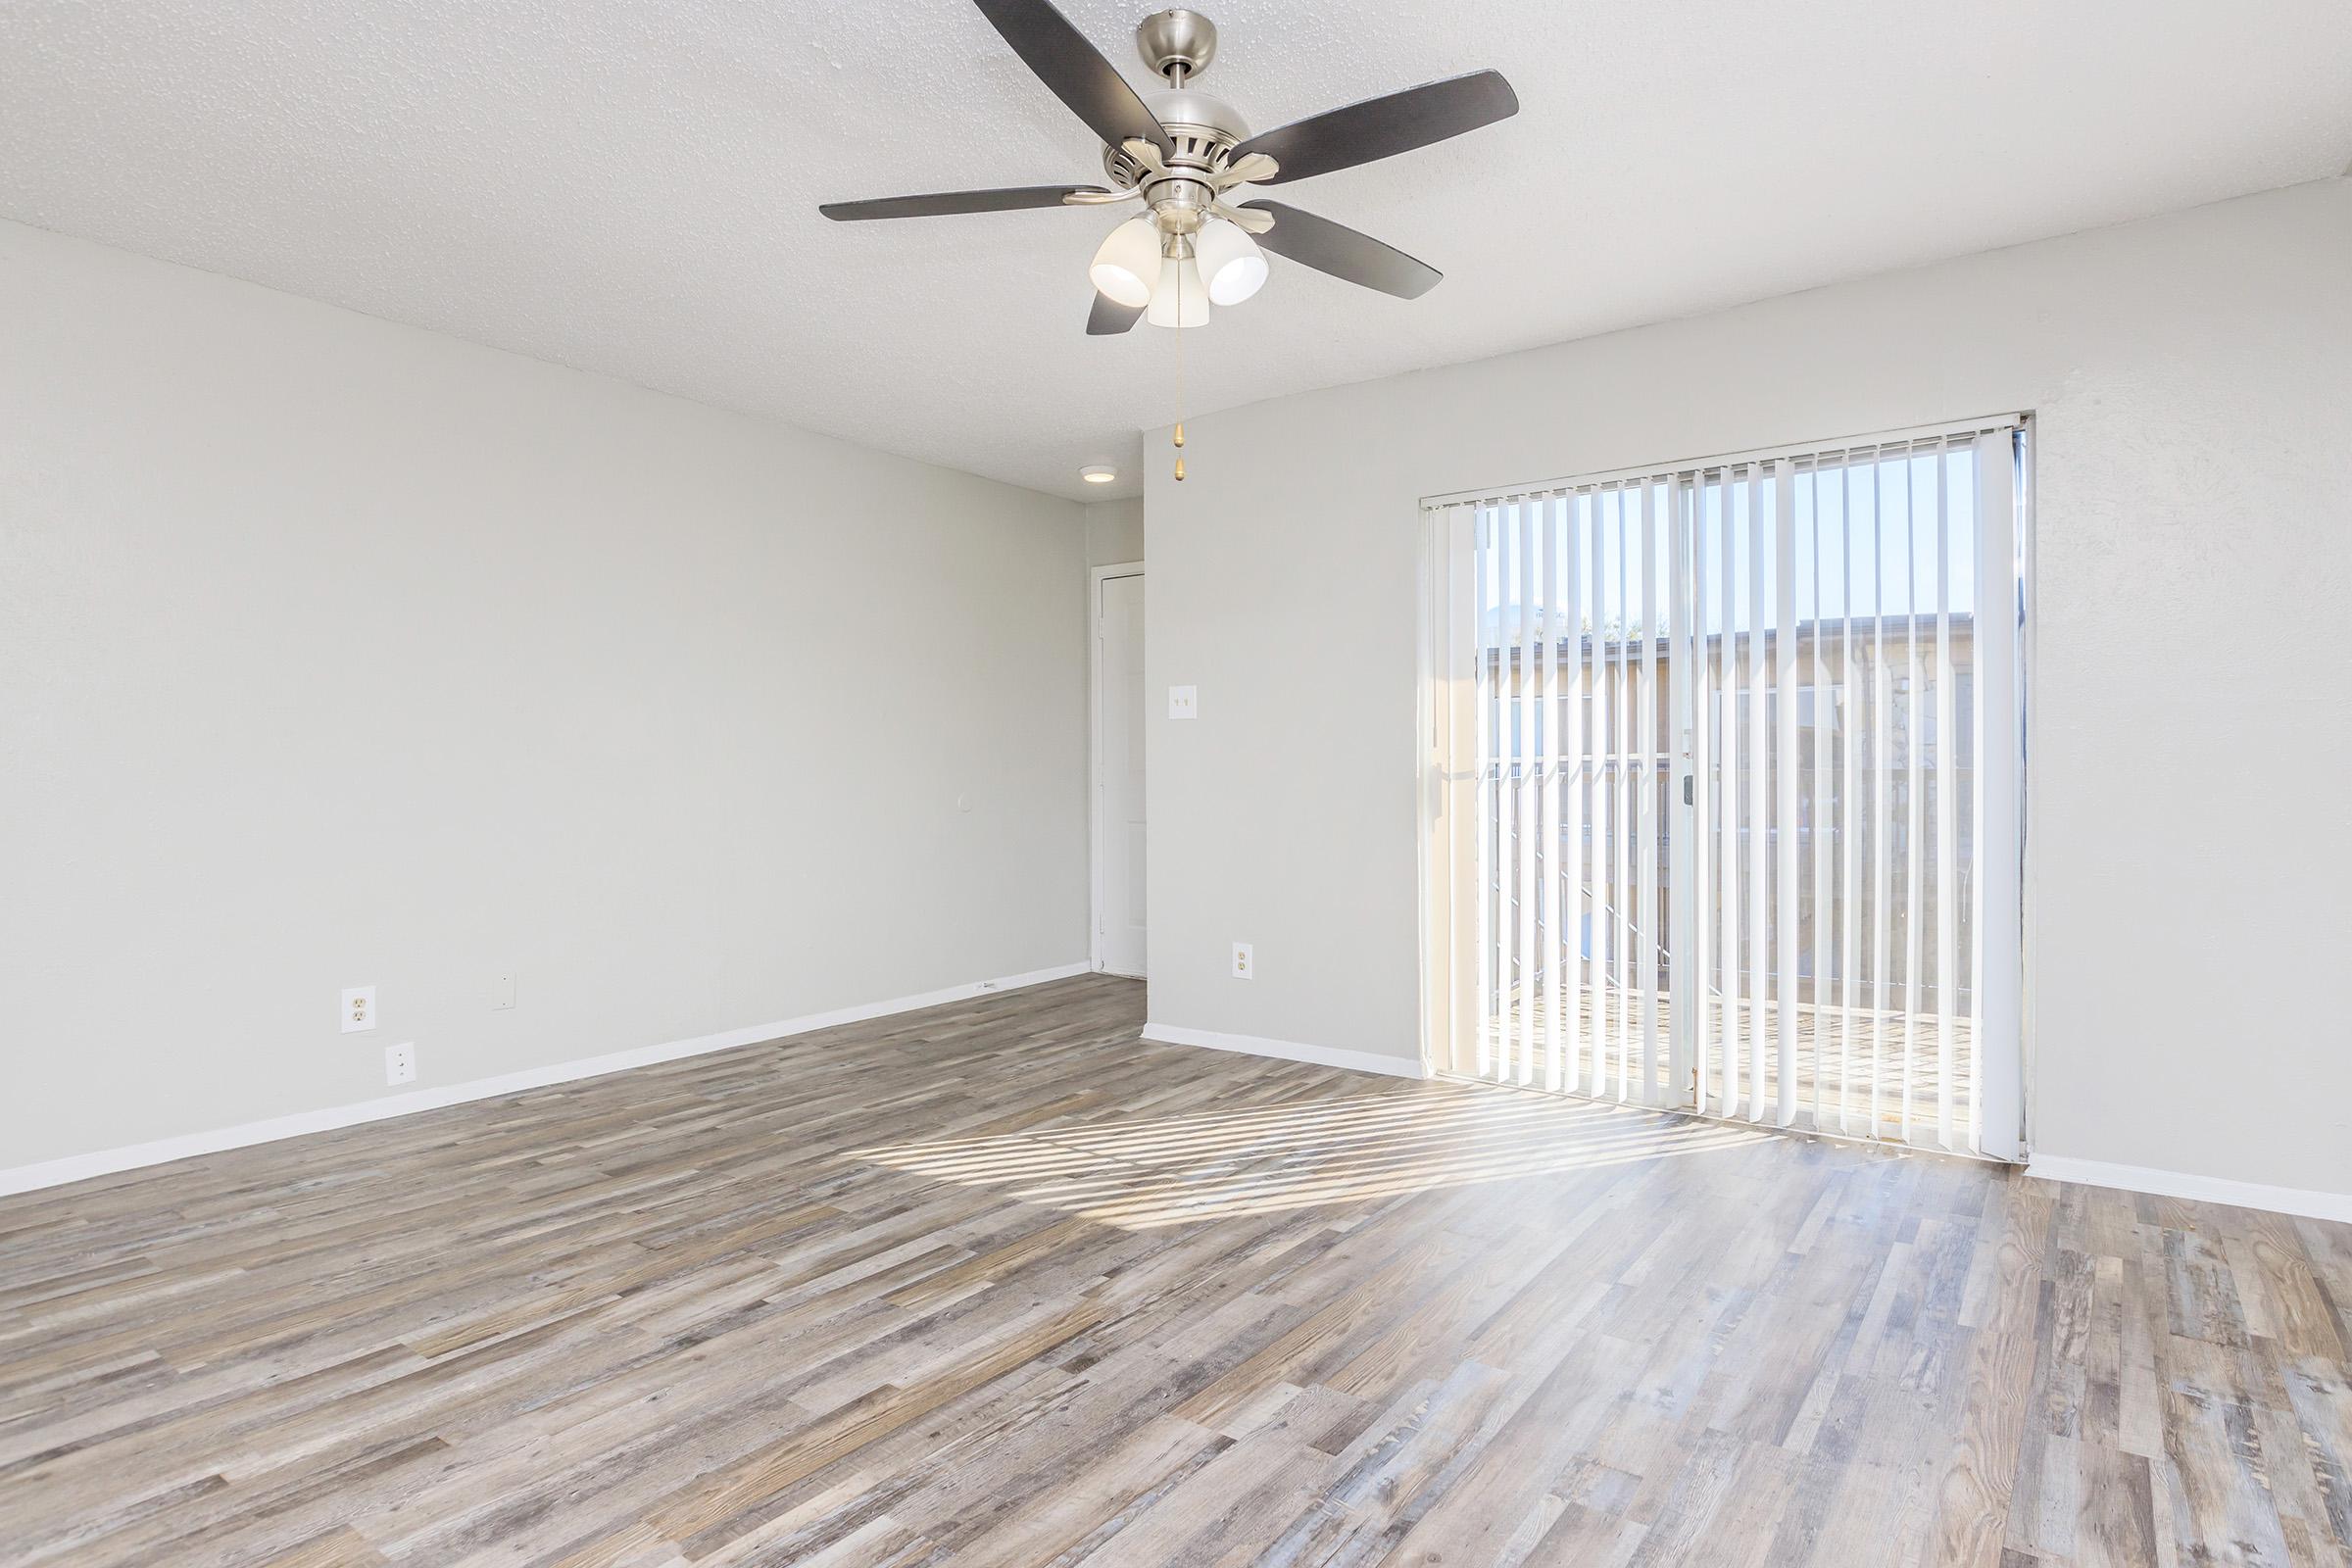 SPECTACULAR APARTMENTS FOR RENT IN IRVING, TX.